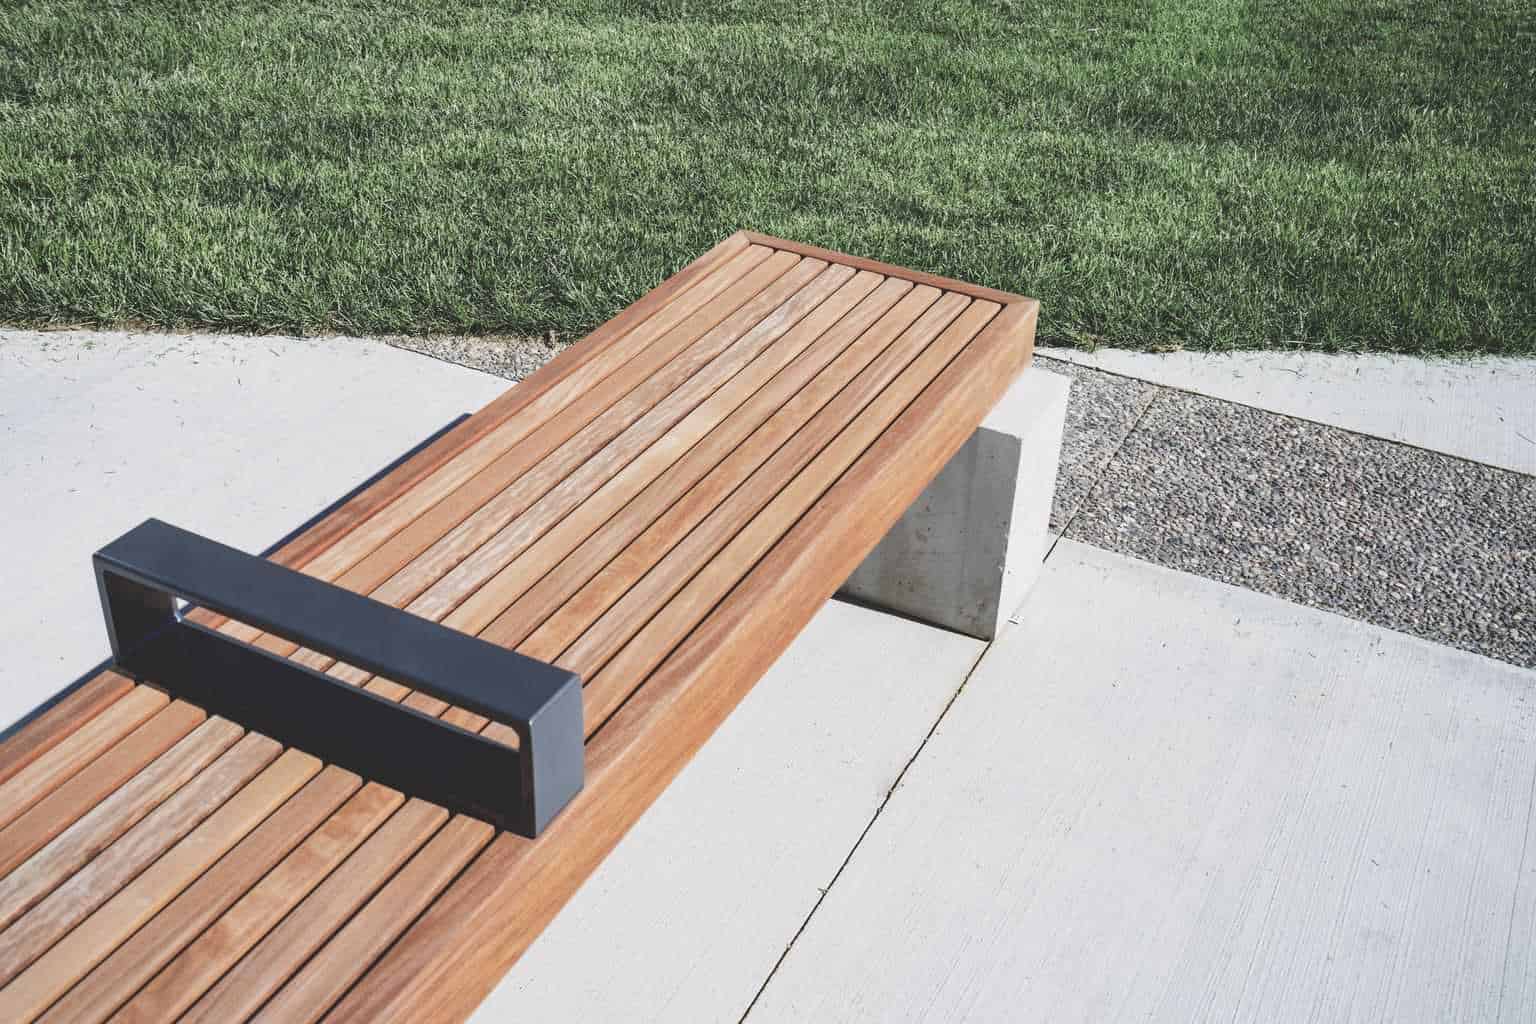 A wooden bench sitting in the grass